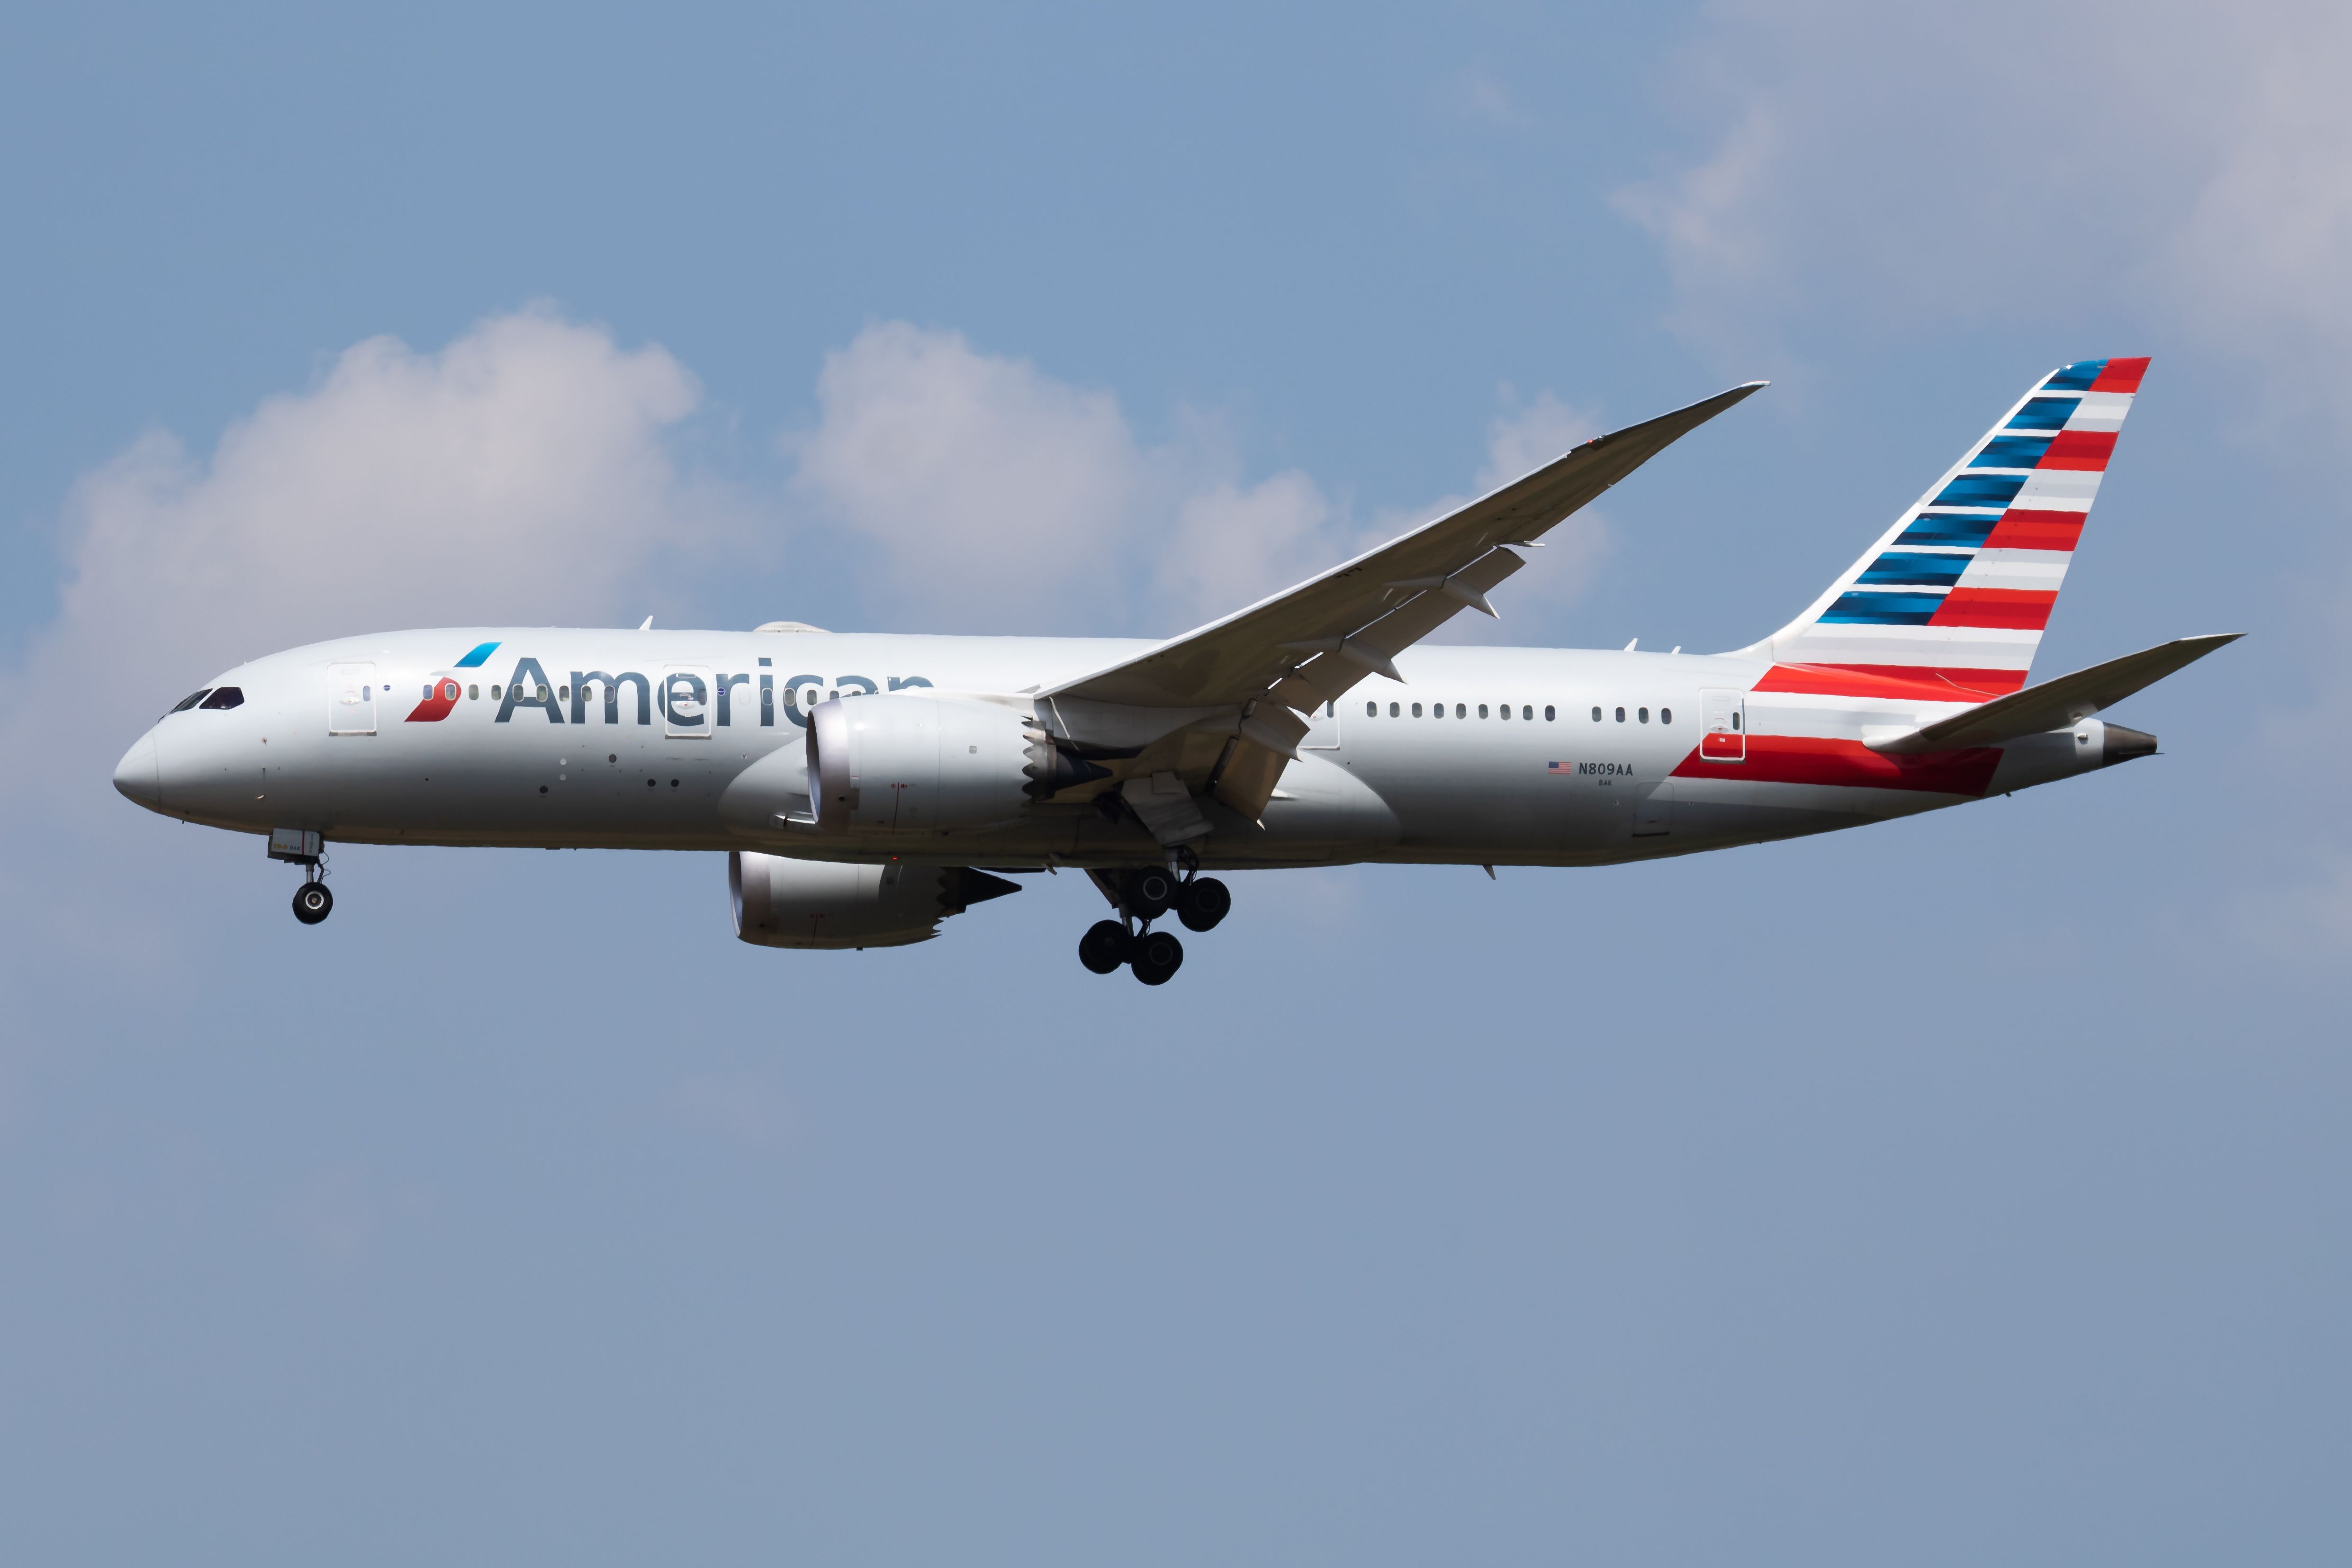 An American Airlines Boeing 787-8 Dreamliner flying in the sky.